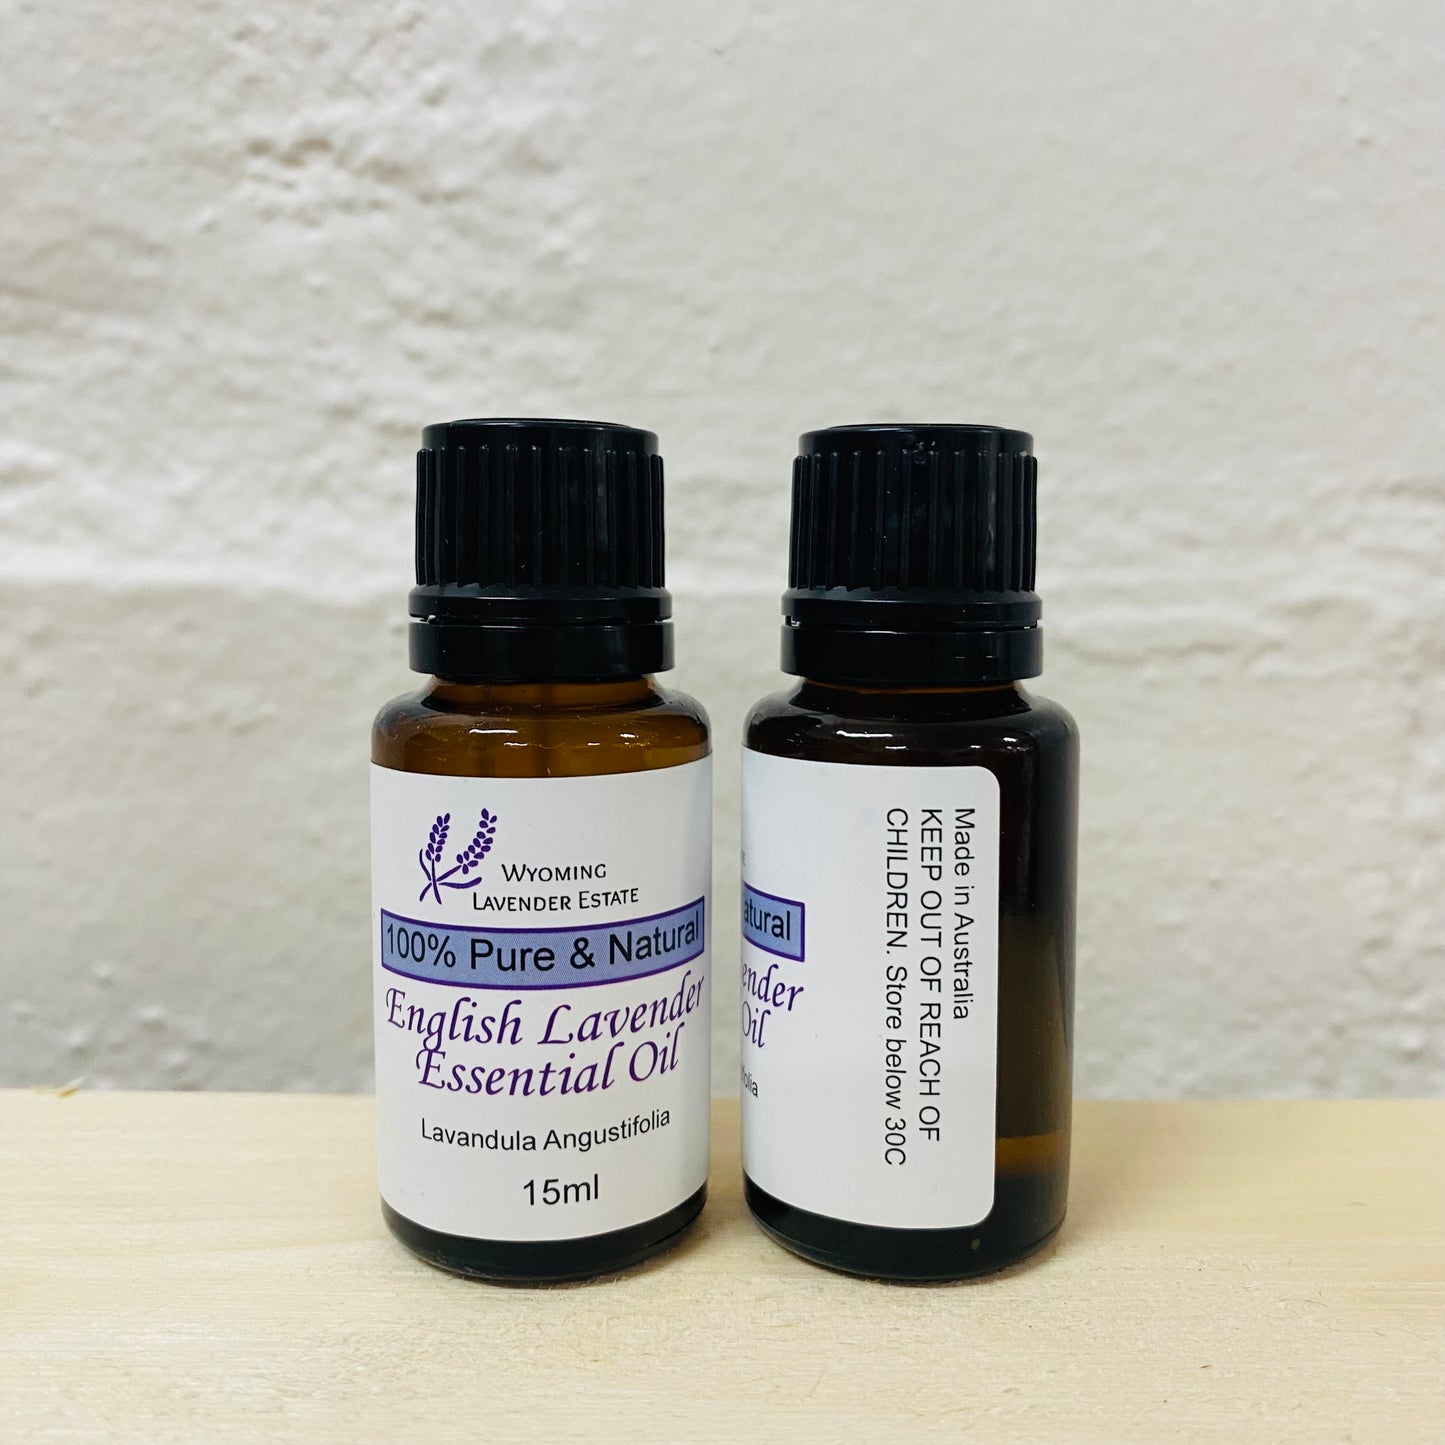 English Lavender Essential Oil 15ml by Wyoming Lavender